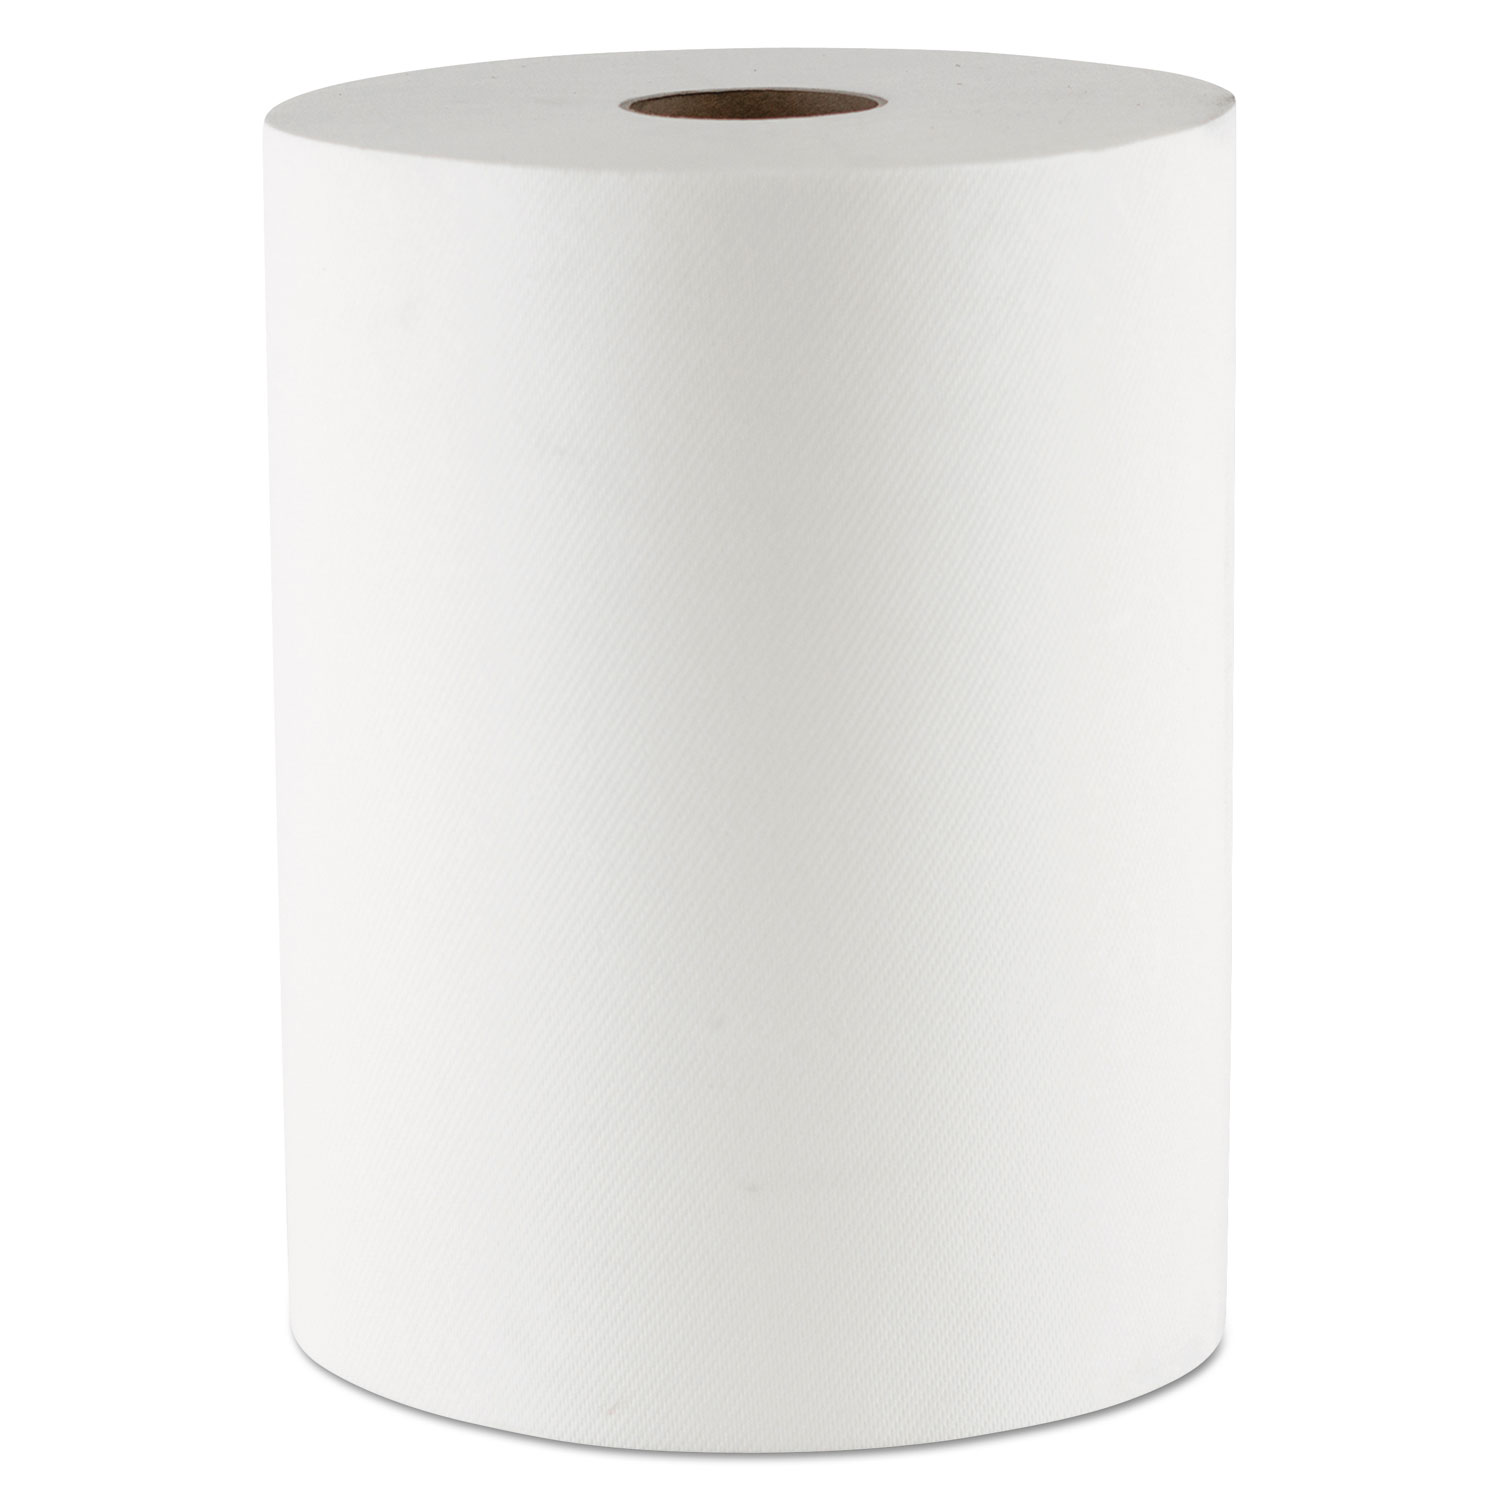  Morcon Tissue VT106 10 Inch TAD Roll Towels, 1-Ply, 10 x 550 ft, White, 6 Rolls/Carton (MORVT106) 